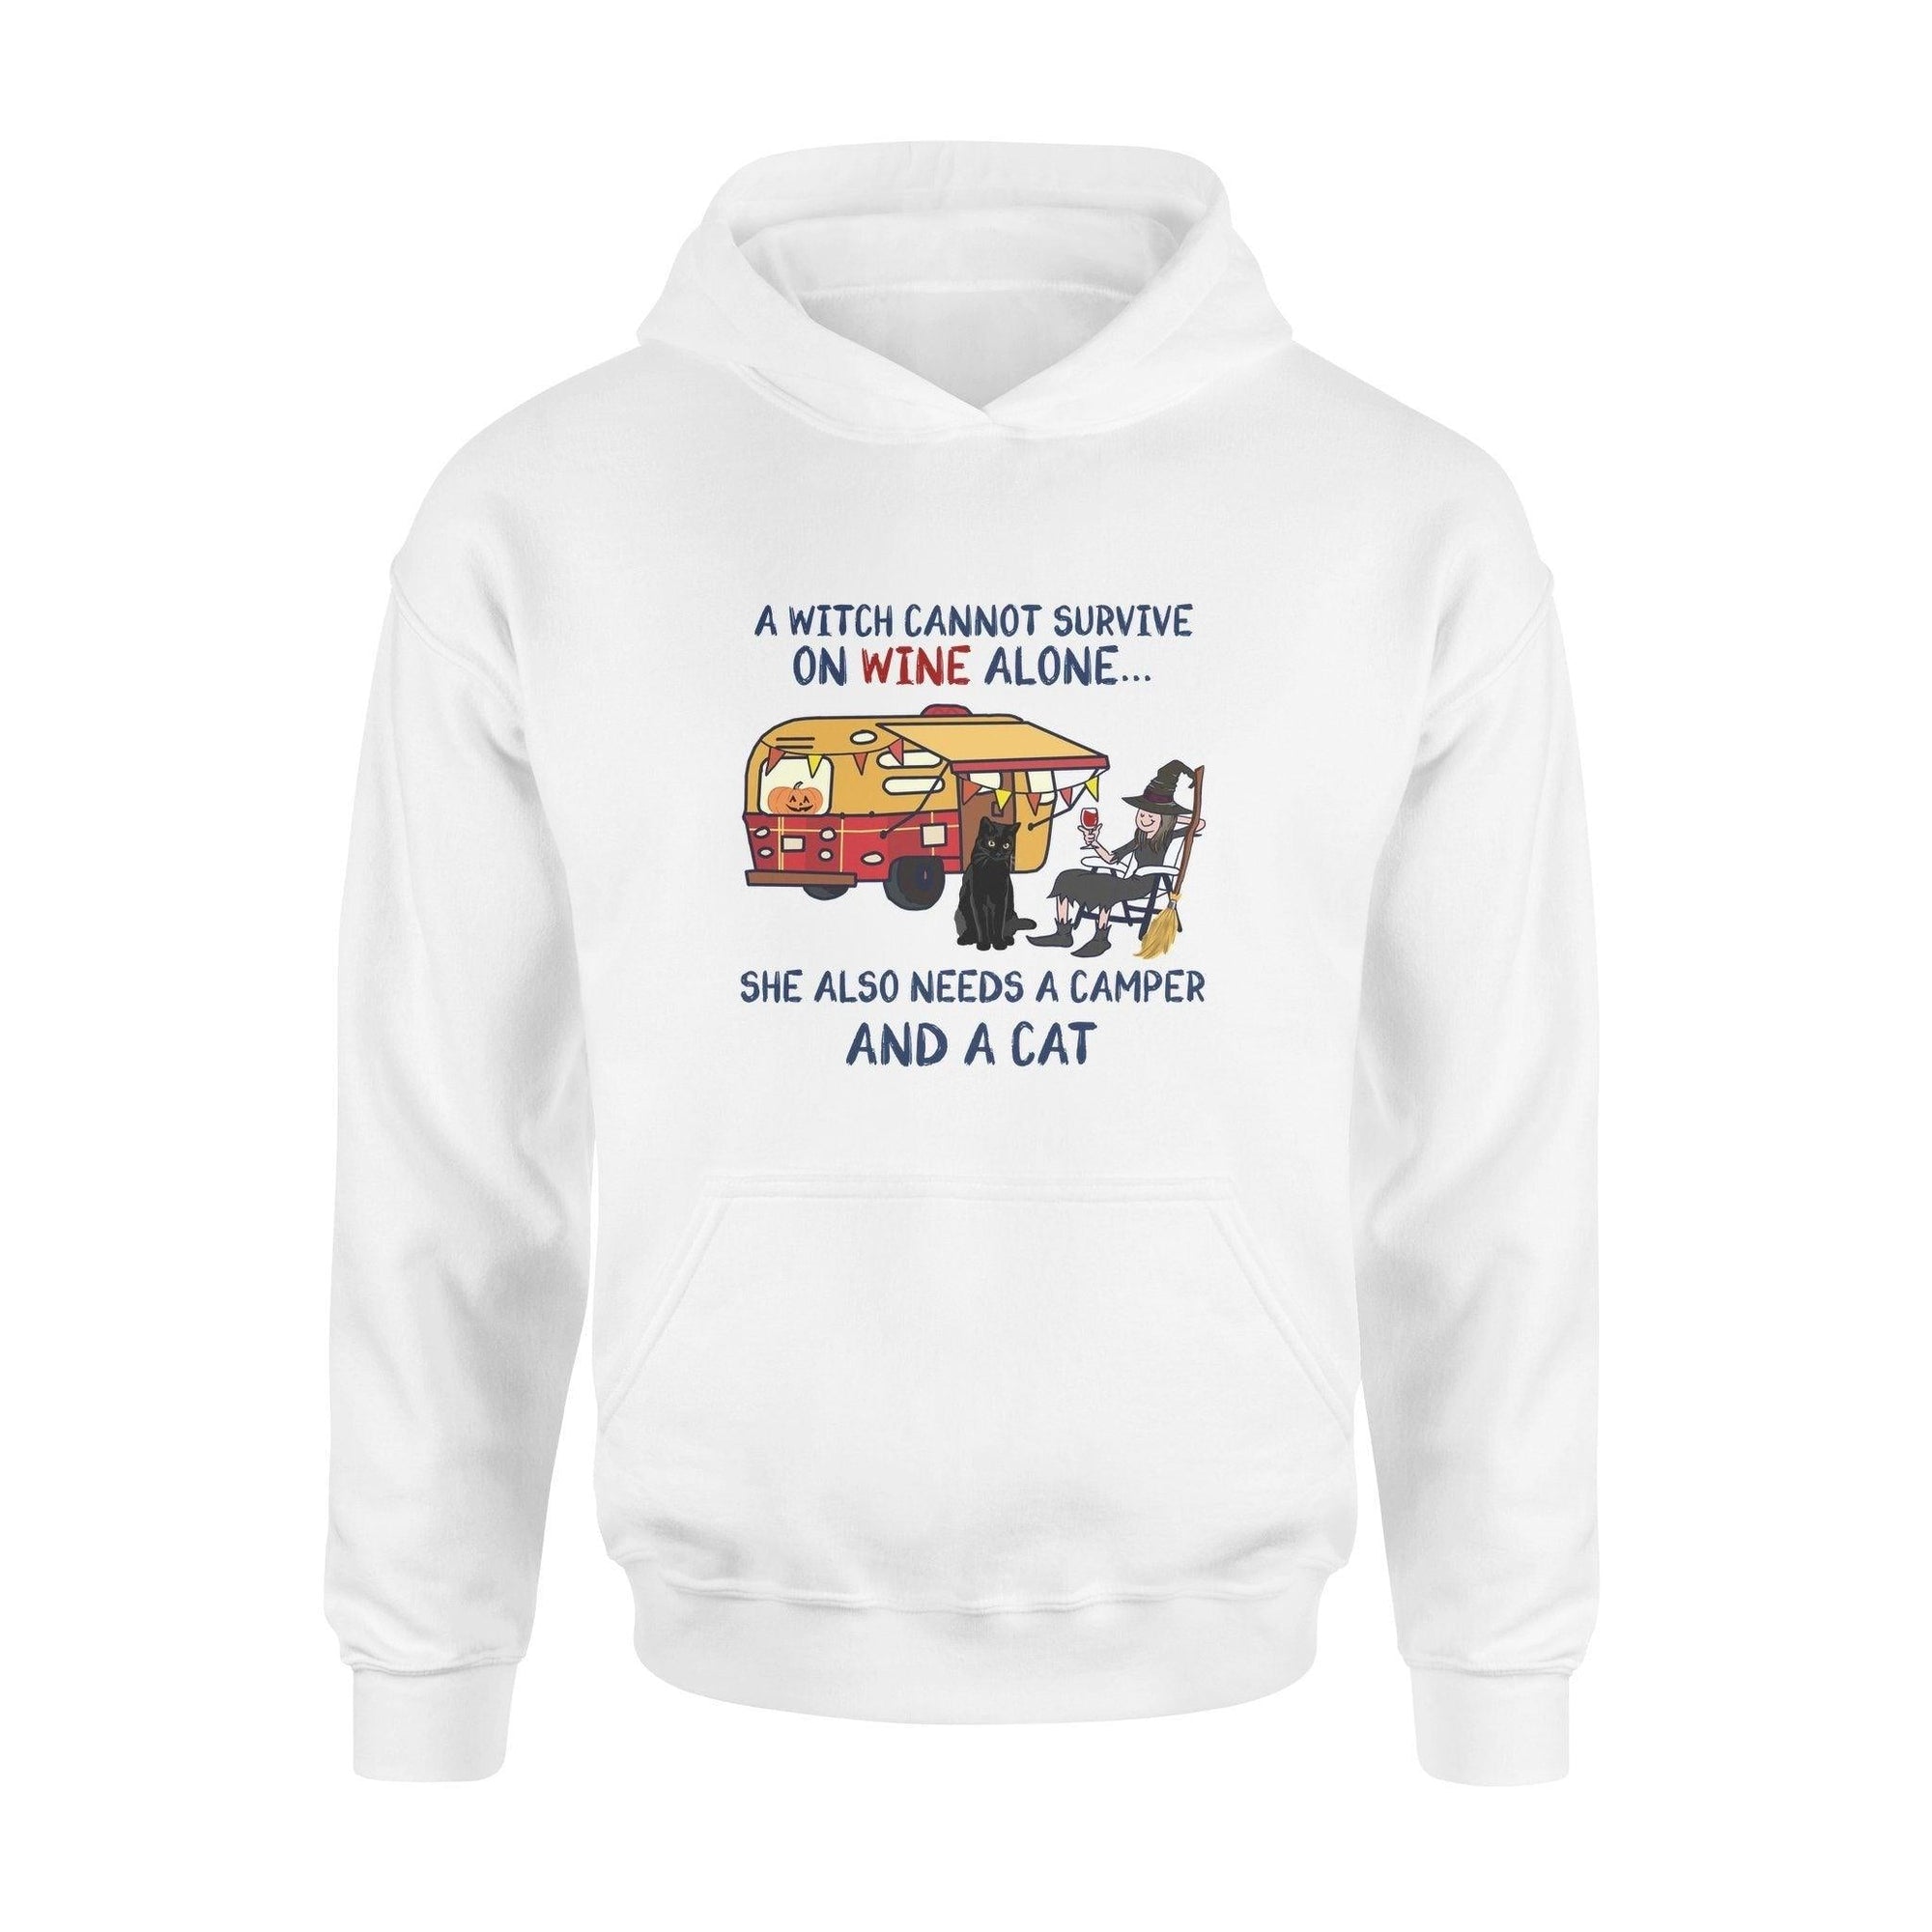 Witch, Camping, Cat, Wine Camper Black Cat A Wich Cannot Survive On Wine Alone - Standard Hoodie - PERSONAL84